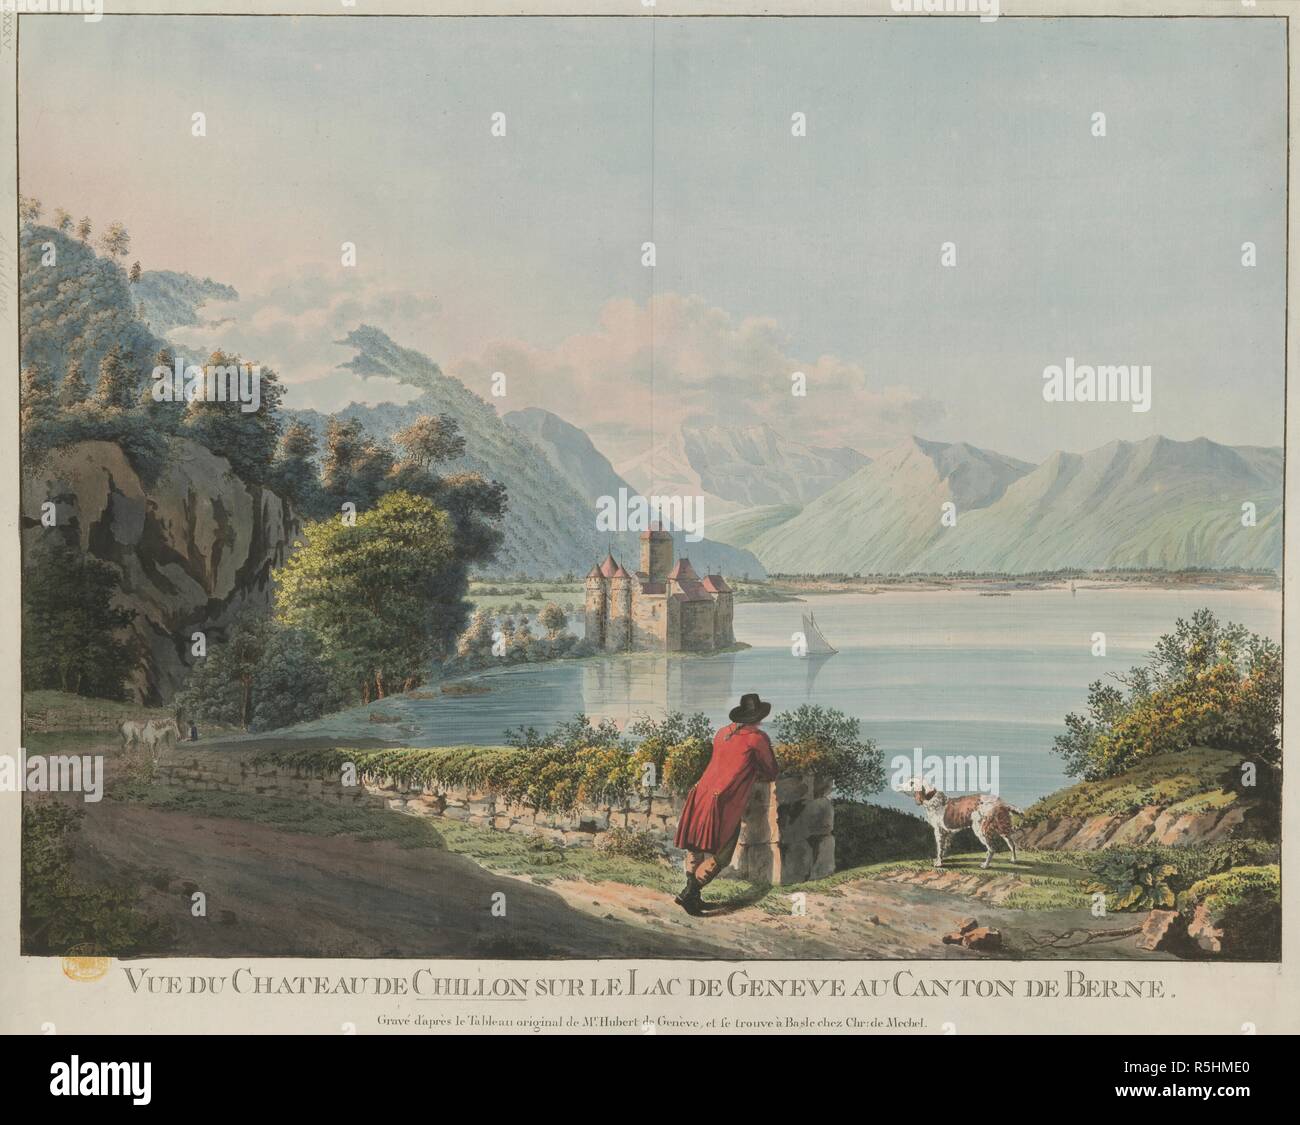 A man in a knee-length coat and hat leans on a stone fence contemplating the view from a country road by the Lake of Geneva in the foreground, with ChÃ¢teau de Chillon beyond and Alps in the background. VUE DU CHATEAU DE CHILLON SUR LE LAC DE GENEVE AU CANTON DE BERNE. [Basel] : [Christian von Mechel], [about 1775]. Hand-coloured etching. Source: Maps K.Top.85.61.a. Language: French. Author: ROBERT, HUBERT. Stock Photo